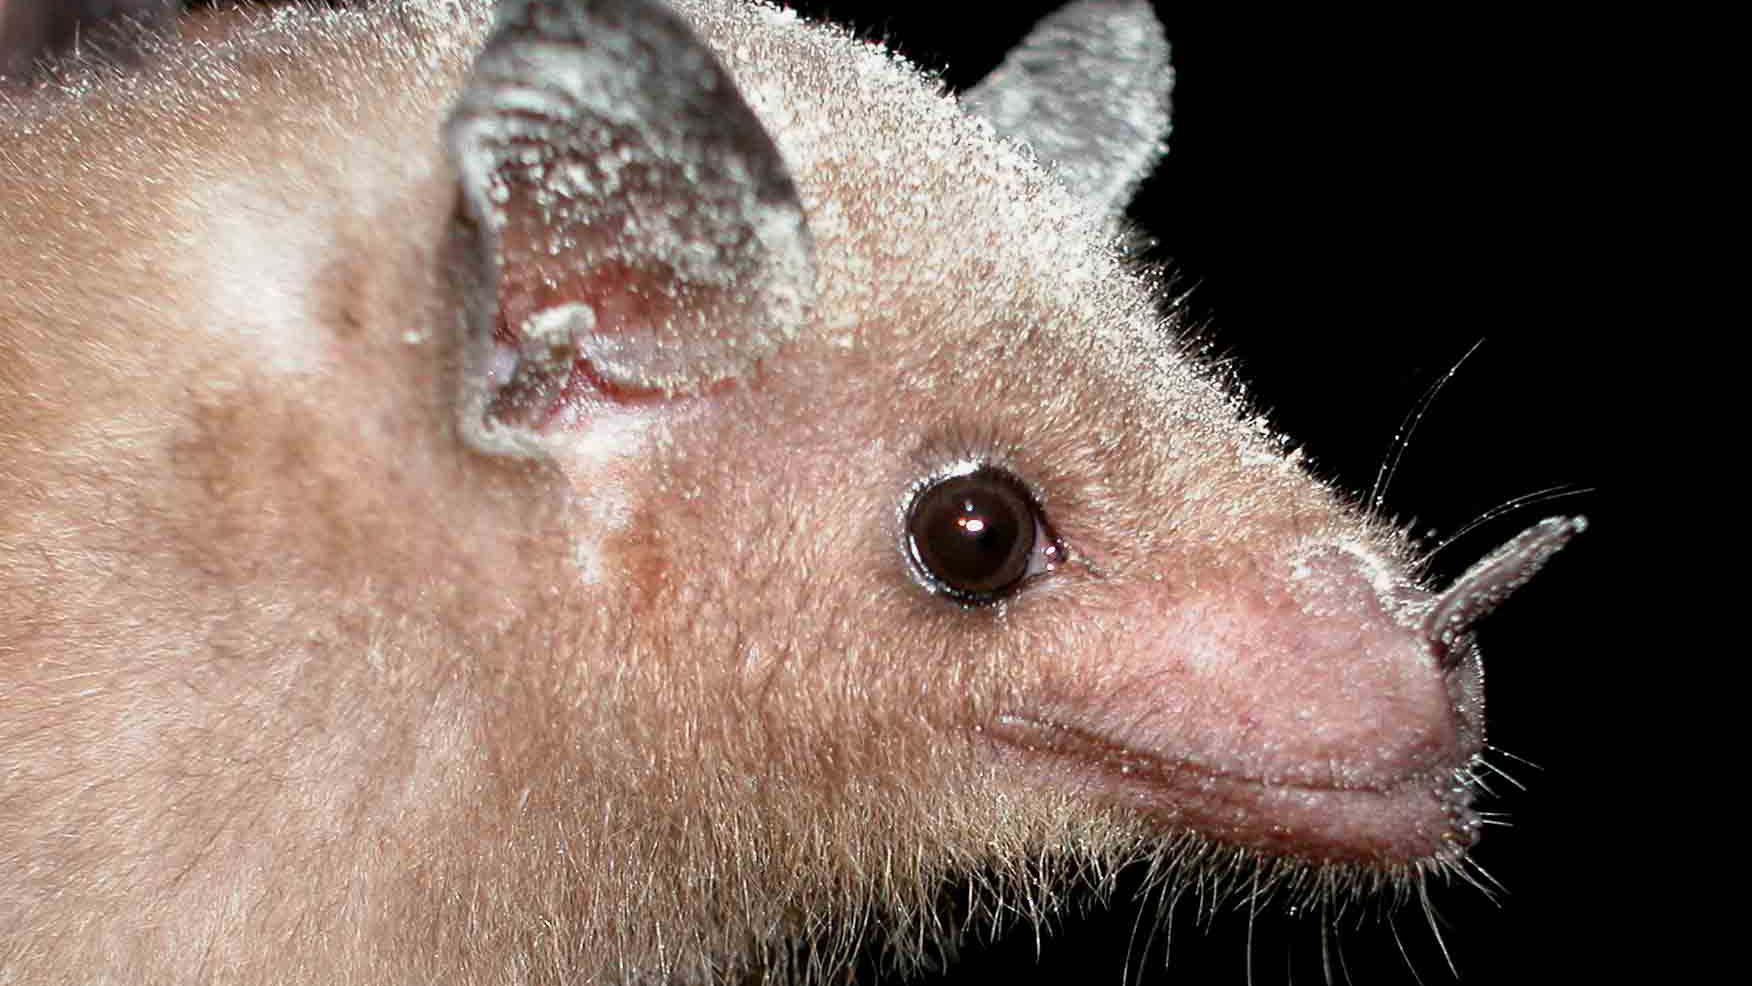 Lesser long-nosed bat with pollen-covered muzzle. Photo © Marco Tschapka